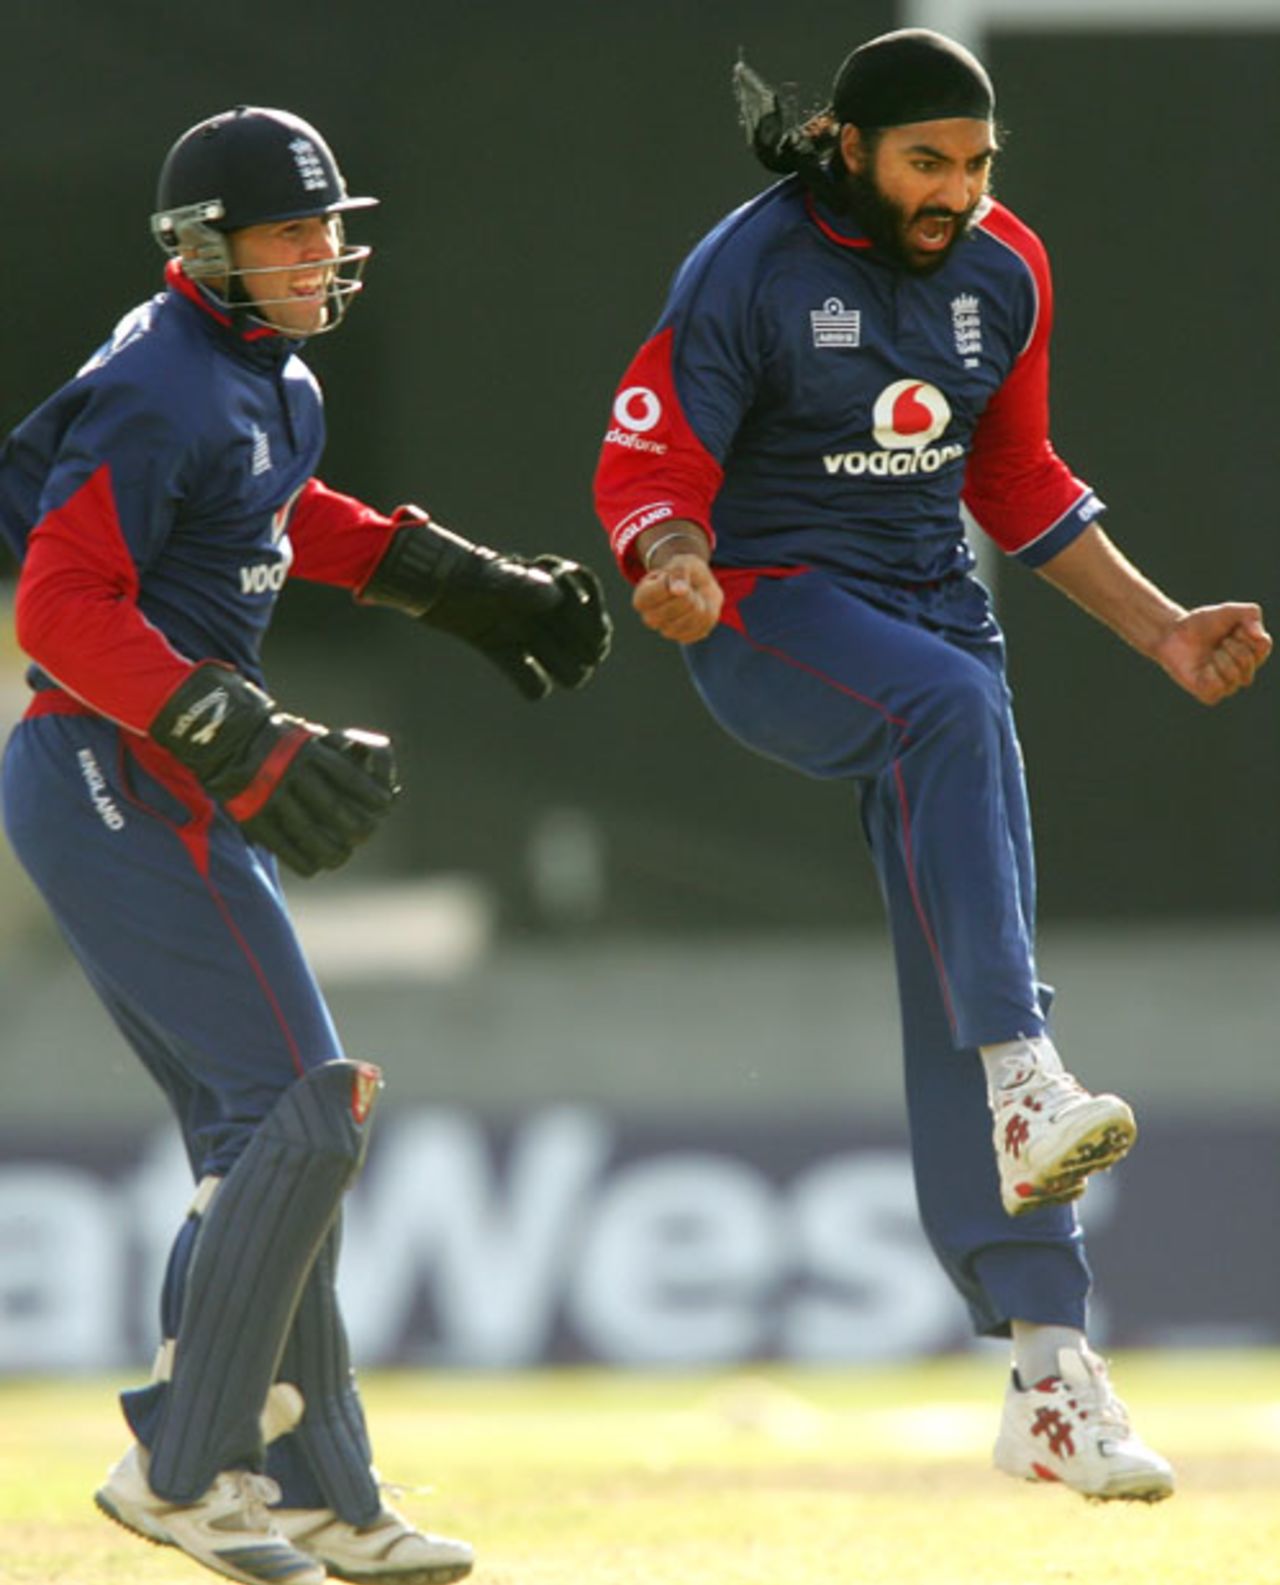 Monty Panesar is elated after dismissing Mahendra Singh Dhoni while Matt Prior looks on , England v India, 4th ODI, Old Trafford, August 30, 2007
